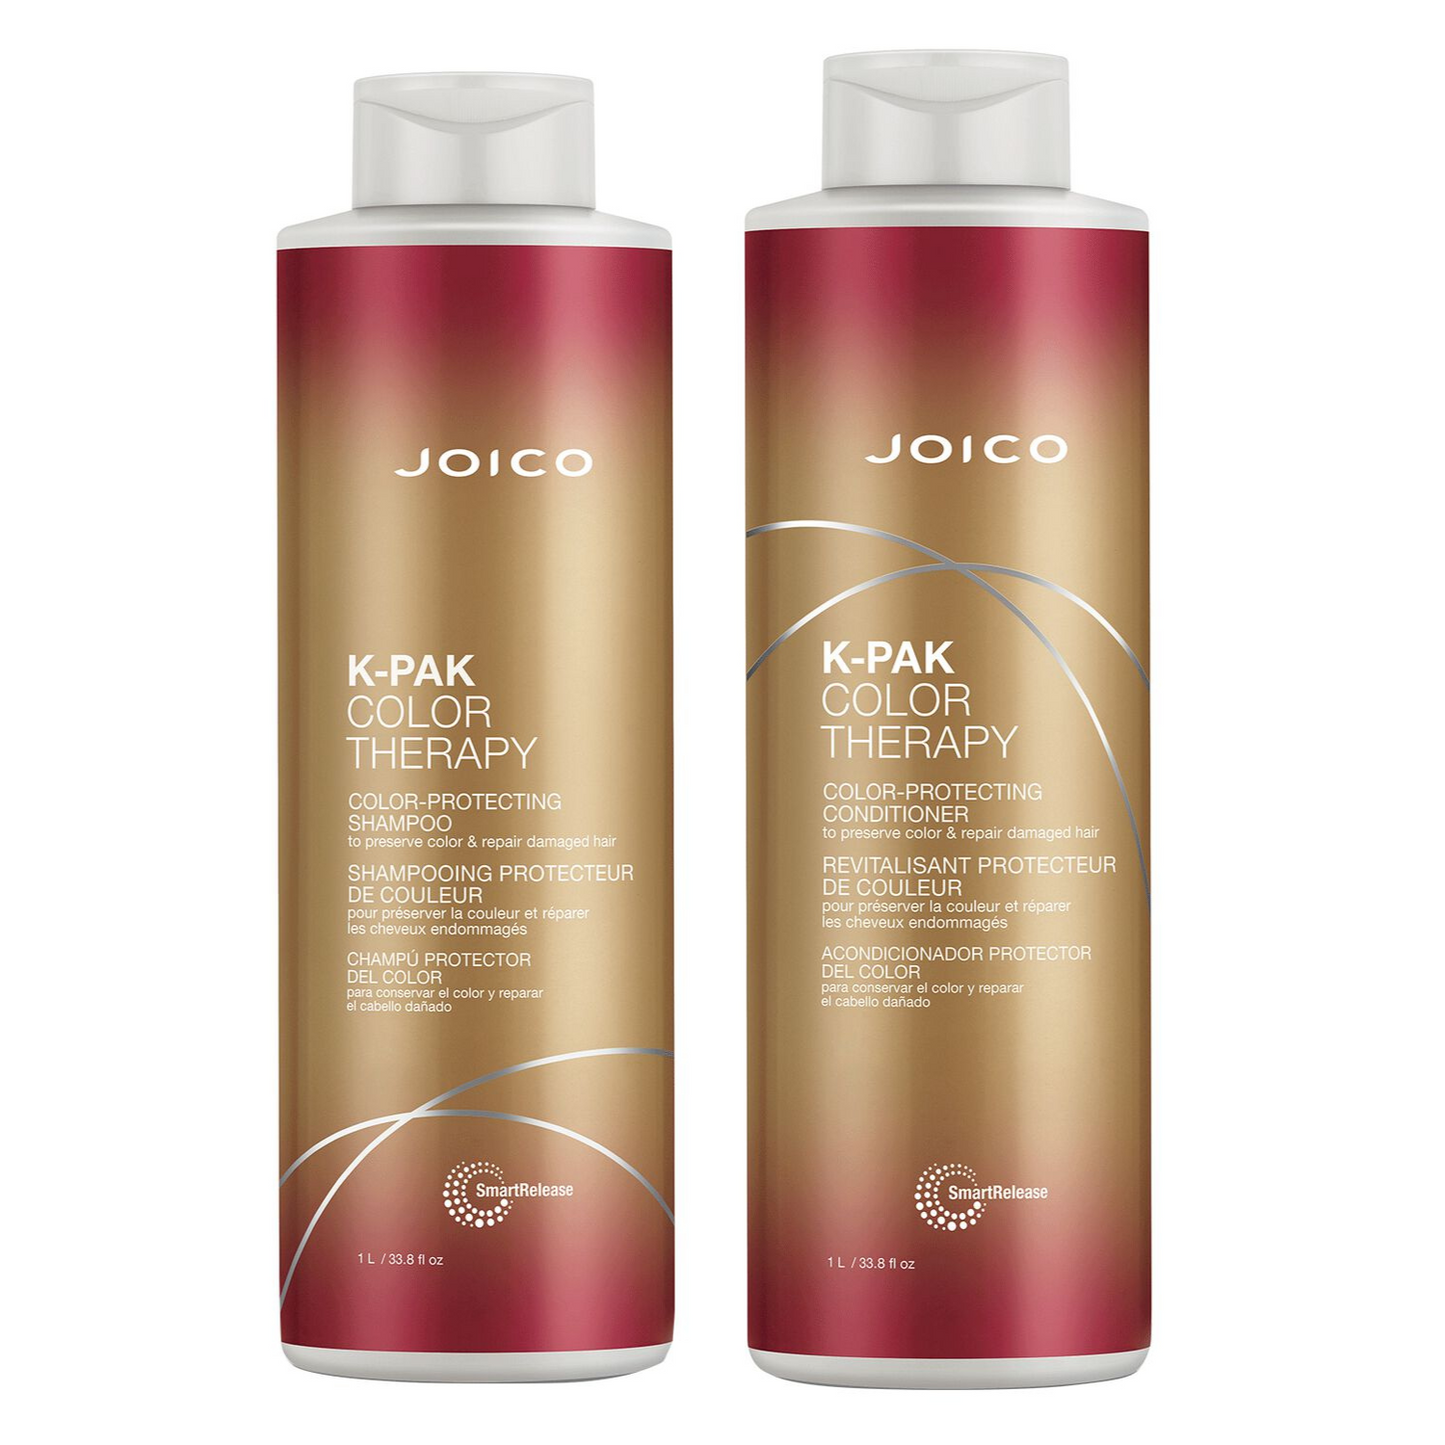 Joico K-PAK Color Therapy Liter Duo